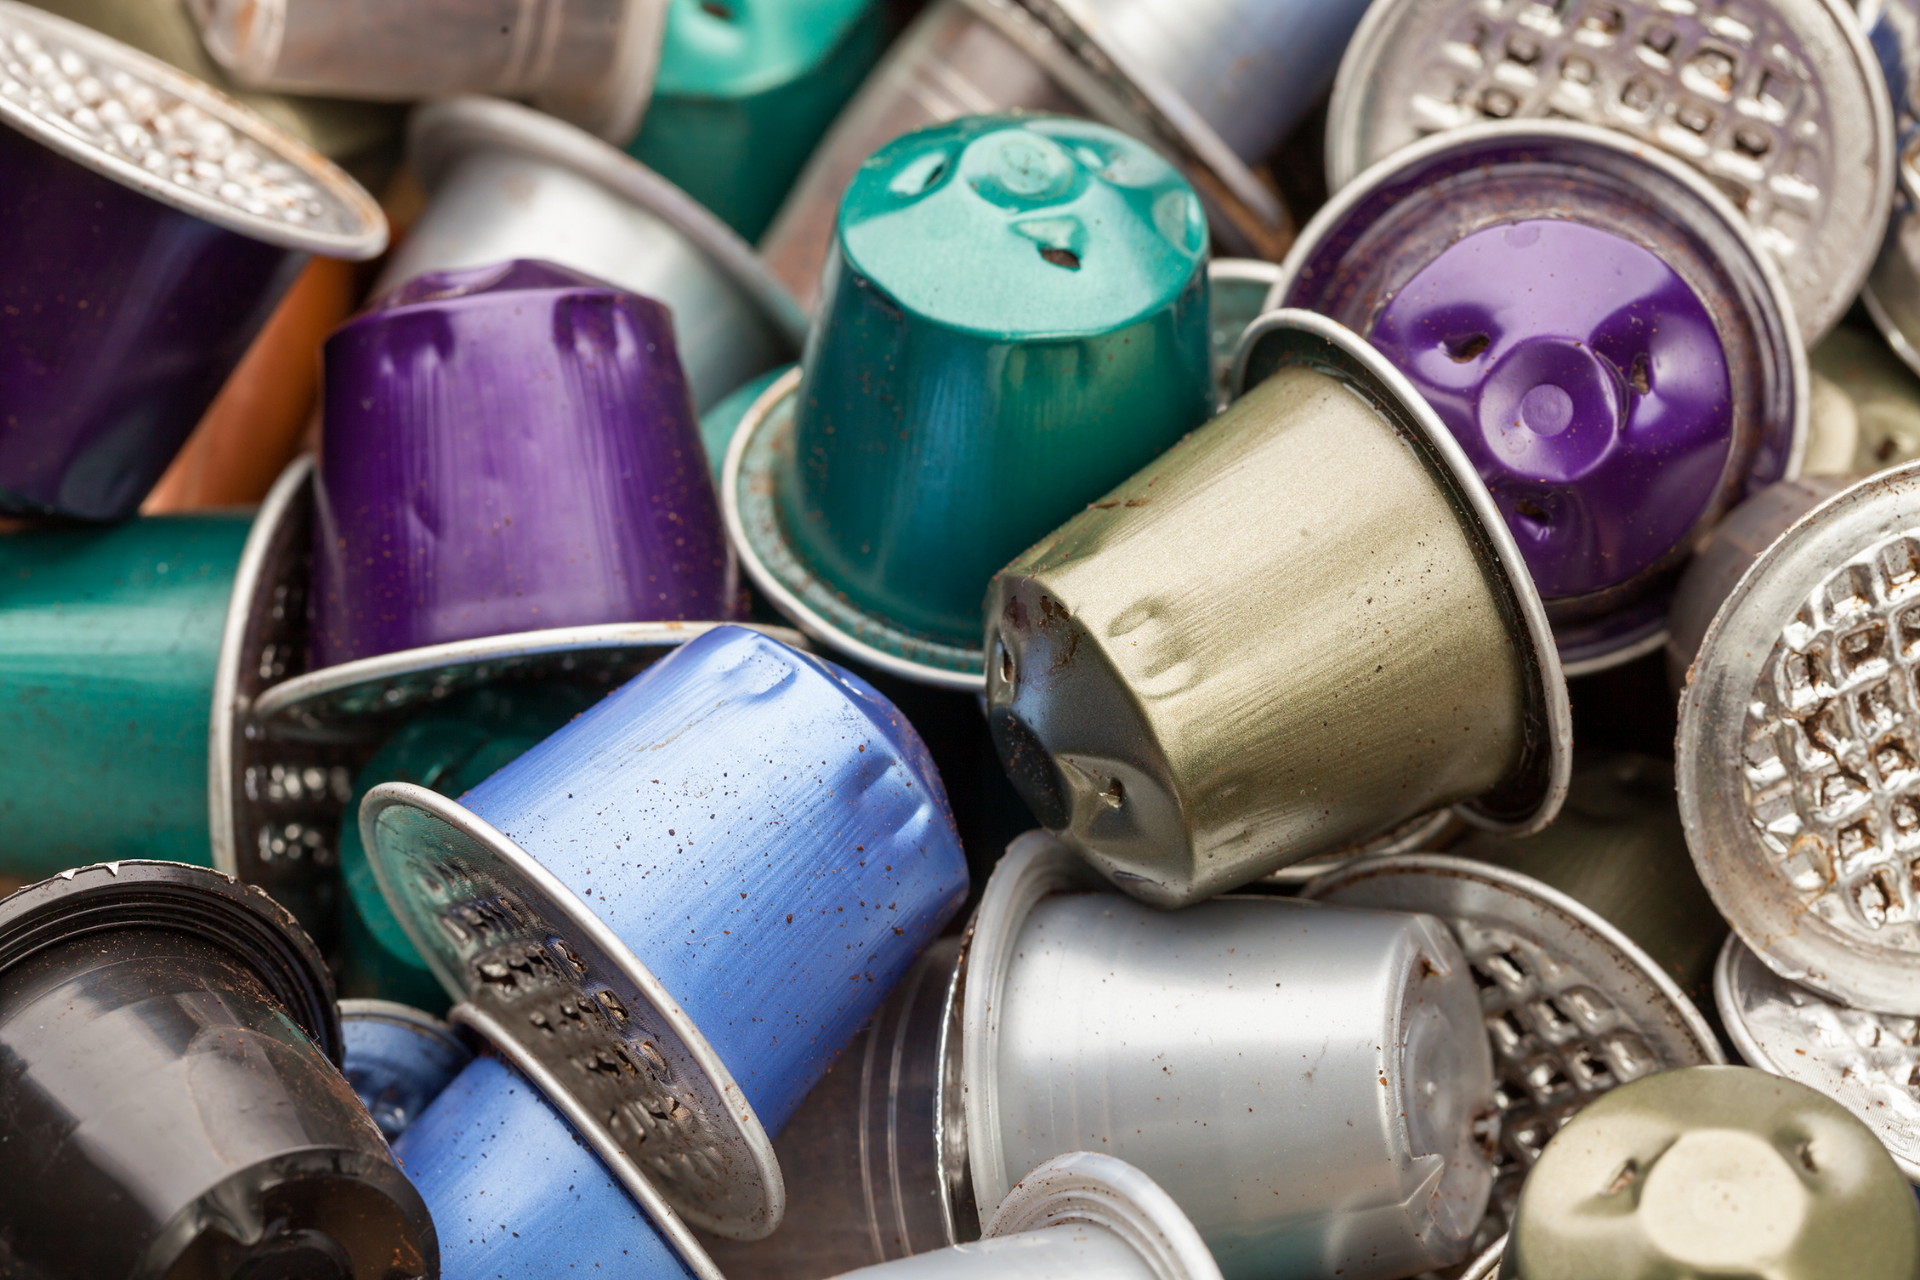 Why single-use coffee pods are bad